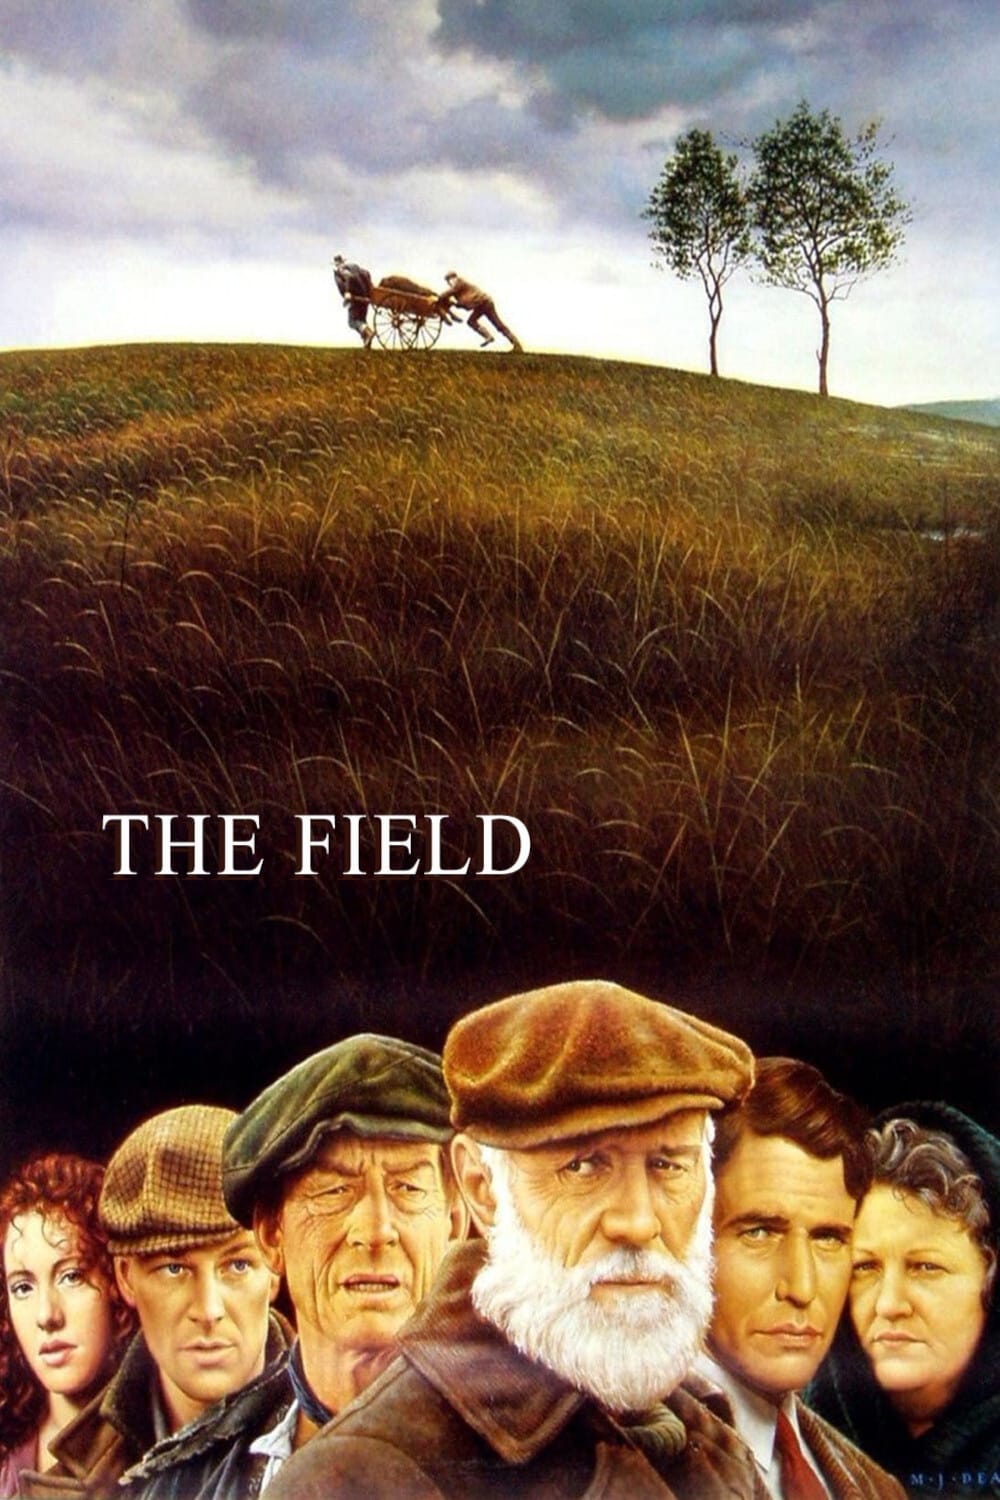 The Field